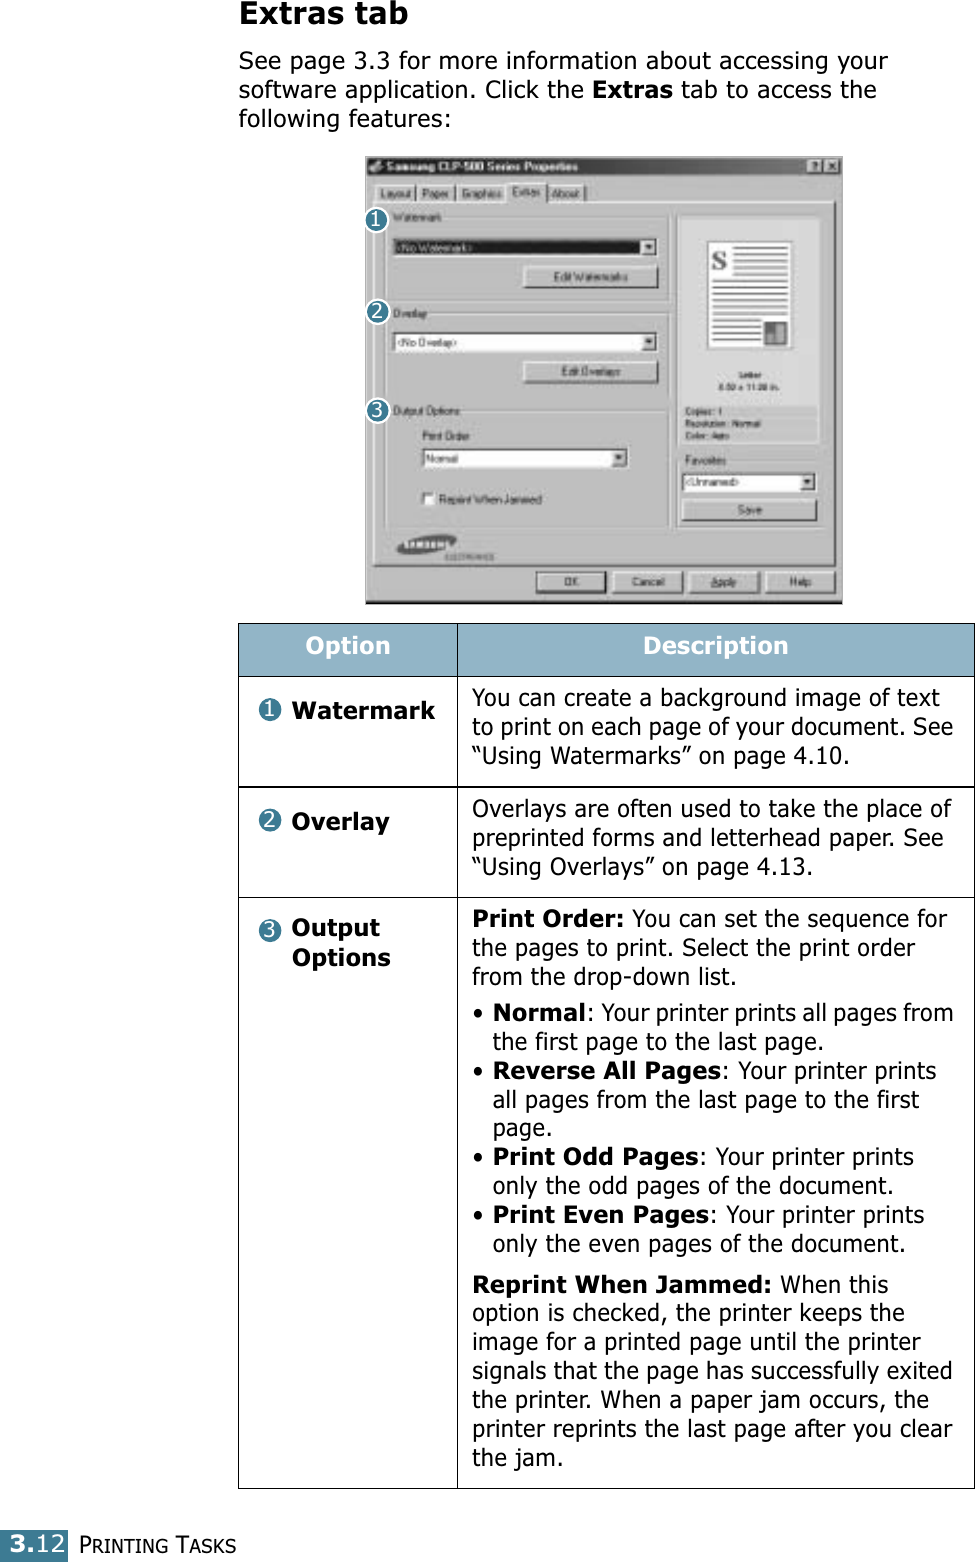 PRINTING TASKS3.12Extras tabSee page 3.3 for more information about accessing your software application. Click the Extras tab to access the following features: Option DescriptionWatermarkYou can create a background image of text to print on each page of your document. See “Using Watermarks” on page 4.10.OverlayOverlays are often used to take the place of preprinted forms and letterhead paper. See “Using Overlays” on page 4.13.Output OptionsPrint Order: You can set the sequence for the pages to print. Select the print order from the drop-down list.•Normal: Your printer prints all pages from the first page to the last page.•Reverse All Pages: Your printer prints all pages from the last page to the first page.•Print Odd Pages: Your printer prints only the odd pages of the document.•Print Even Pages: Your printer prints only the even pages of the document.Reprint When Jammed: When this option is checked, the printer keeps the image for a printed page until the printer signals that the page has successfully exited the printer. When a paper jam occurs, the printer reprints the last page after you clear the jam.123123